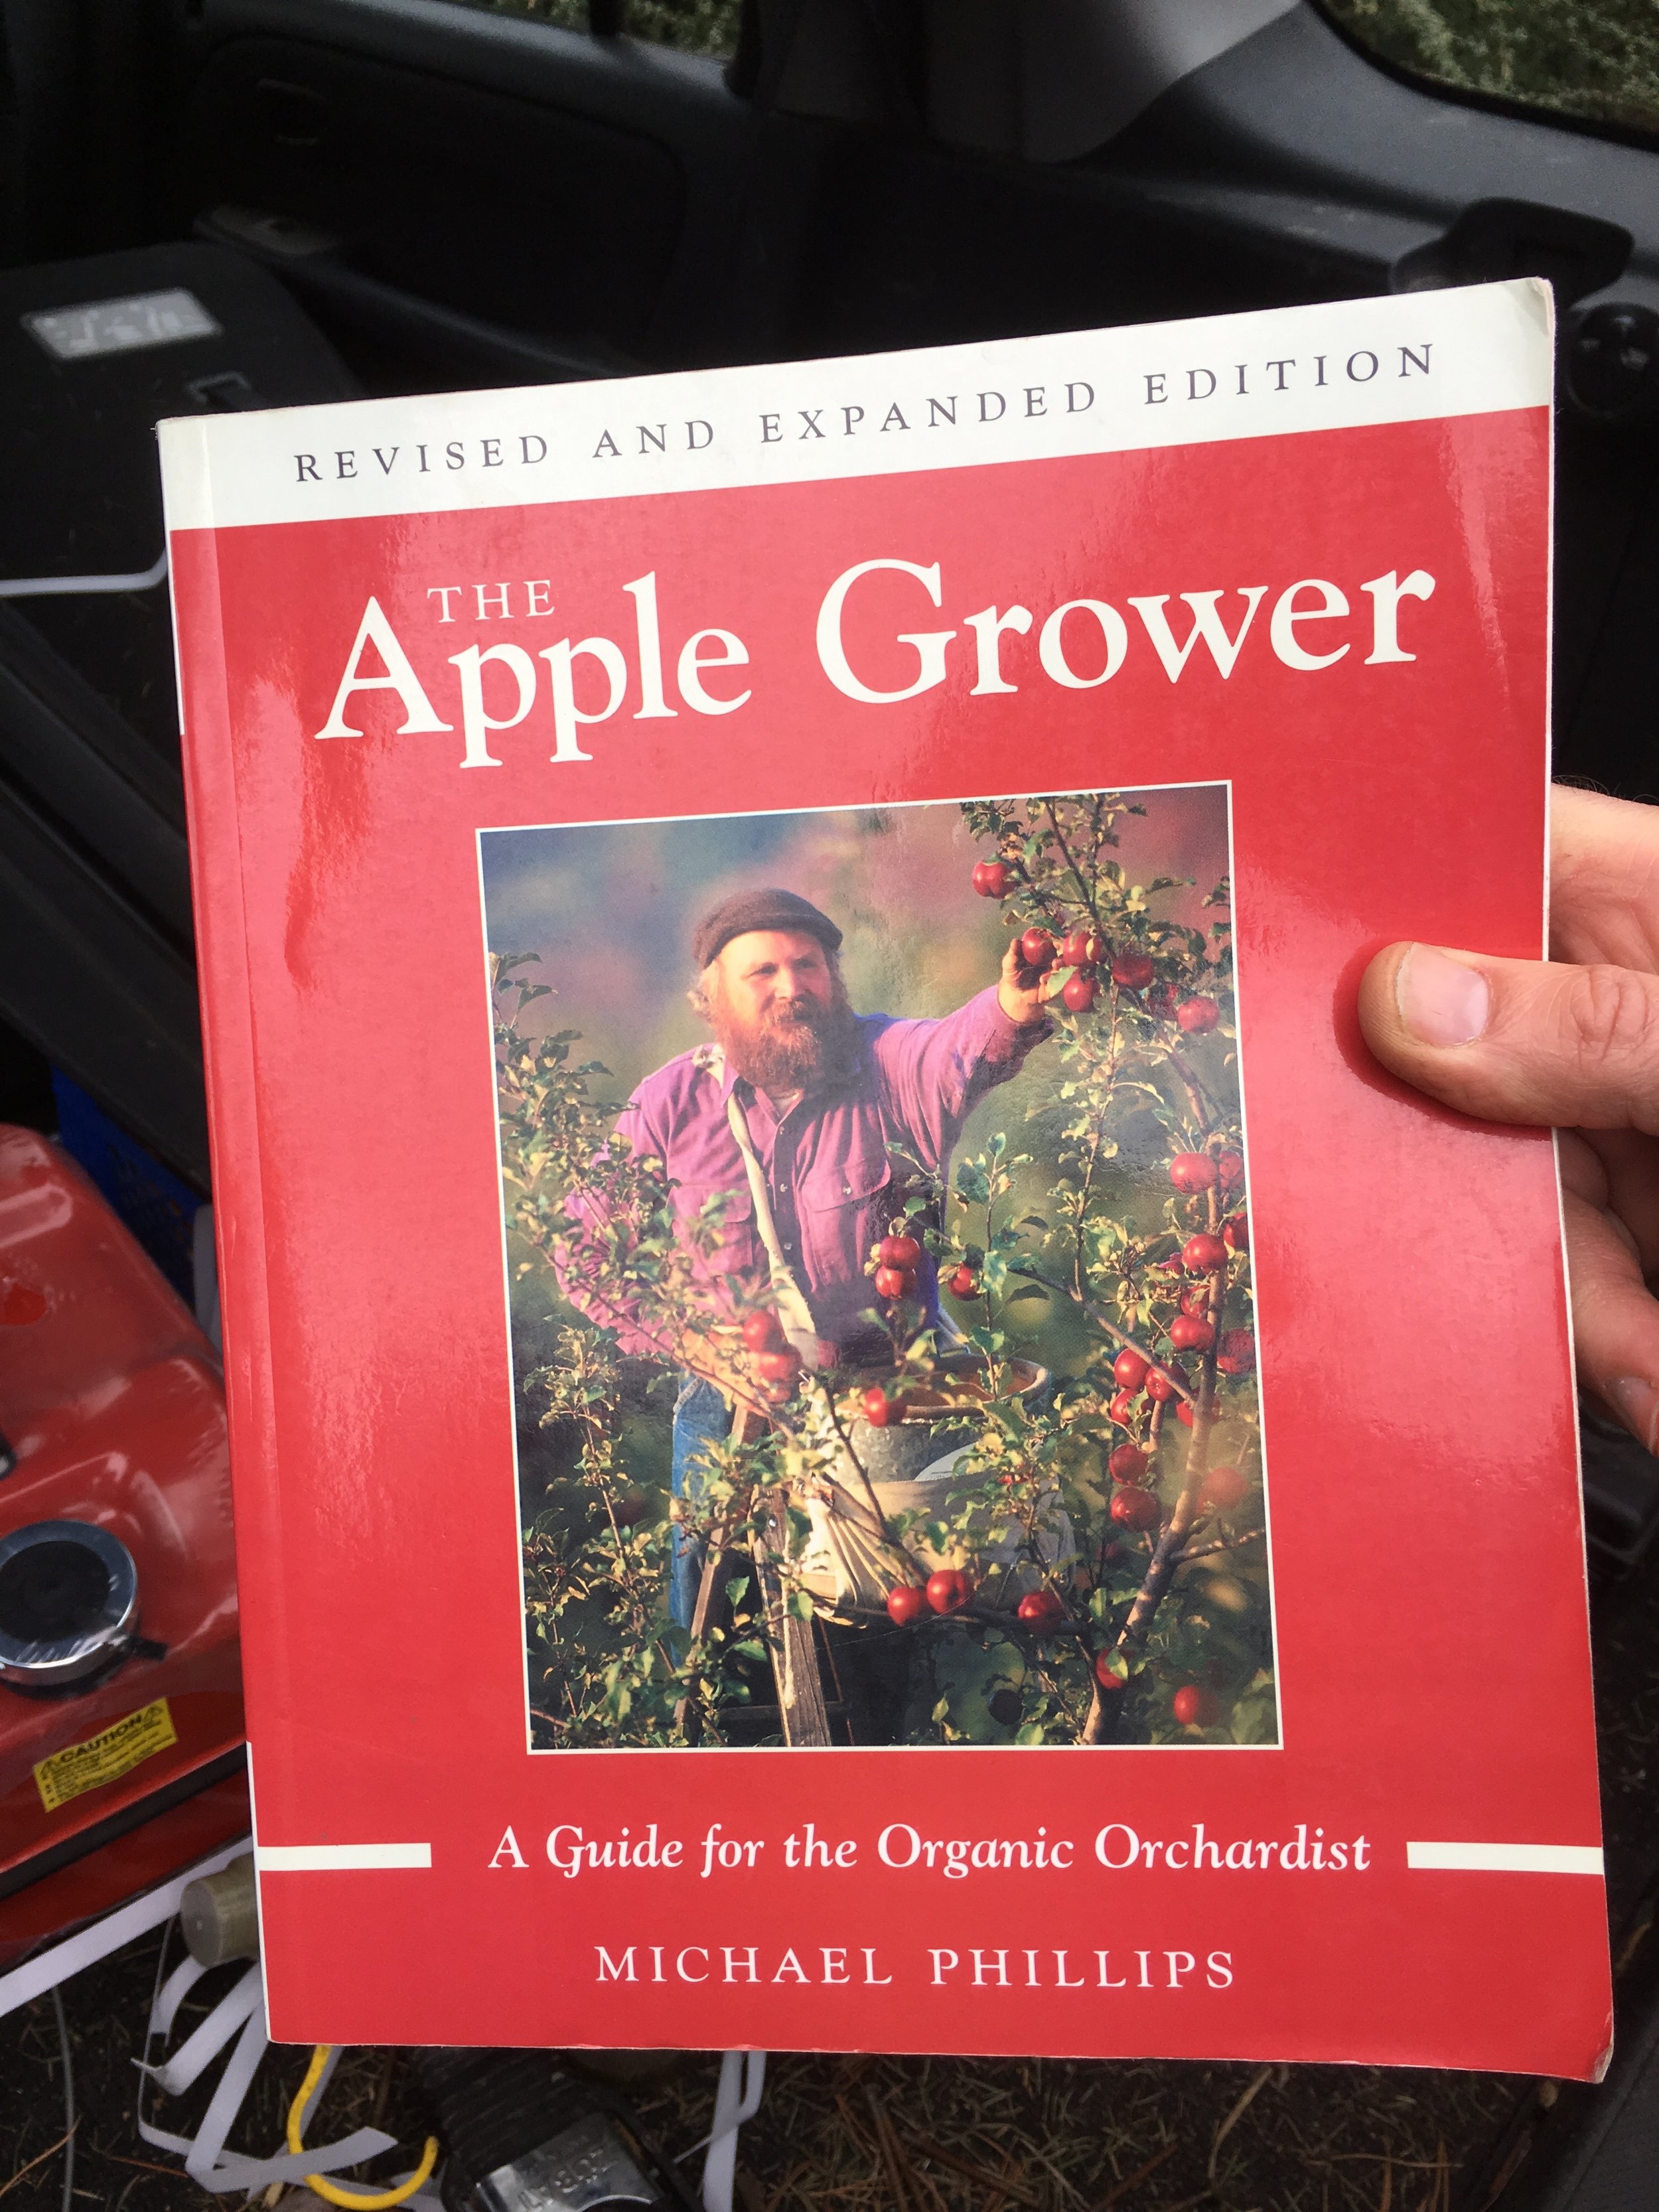 Recommended pruning book